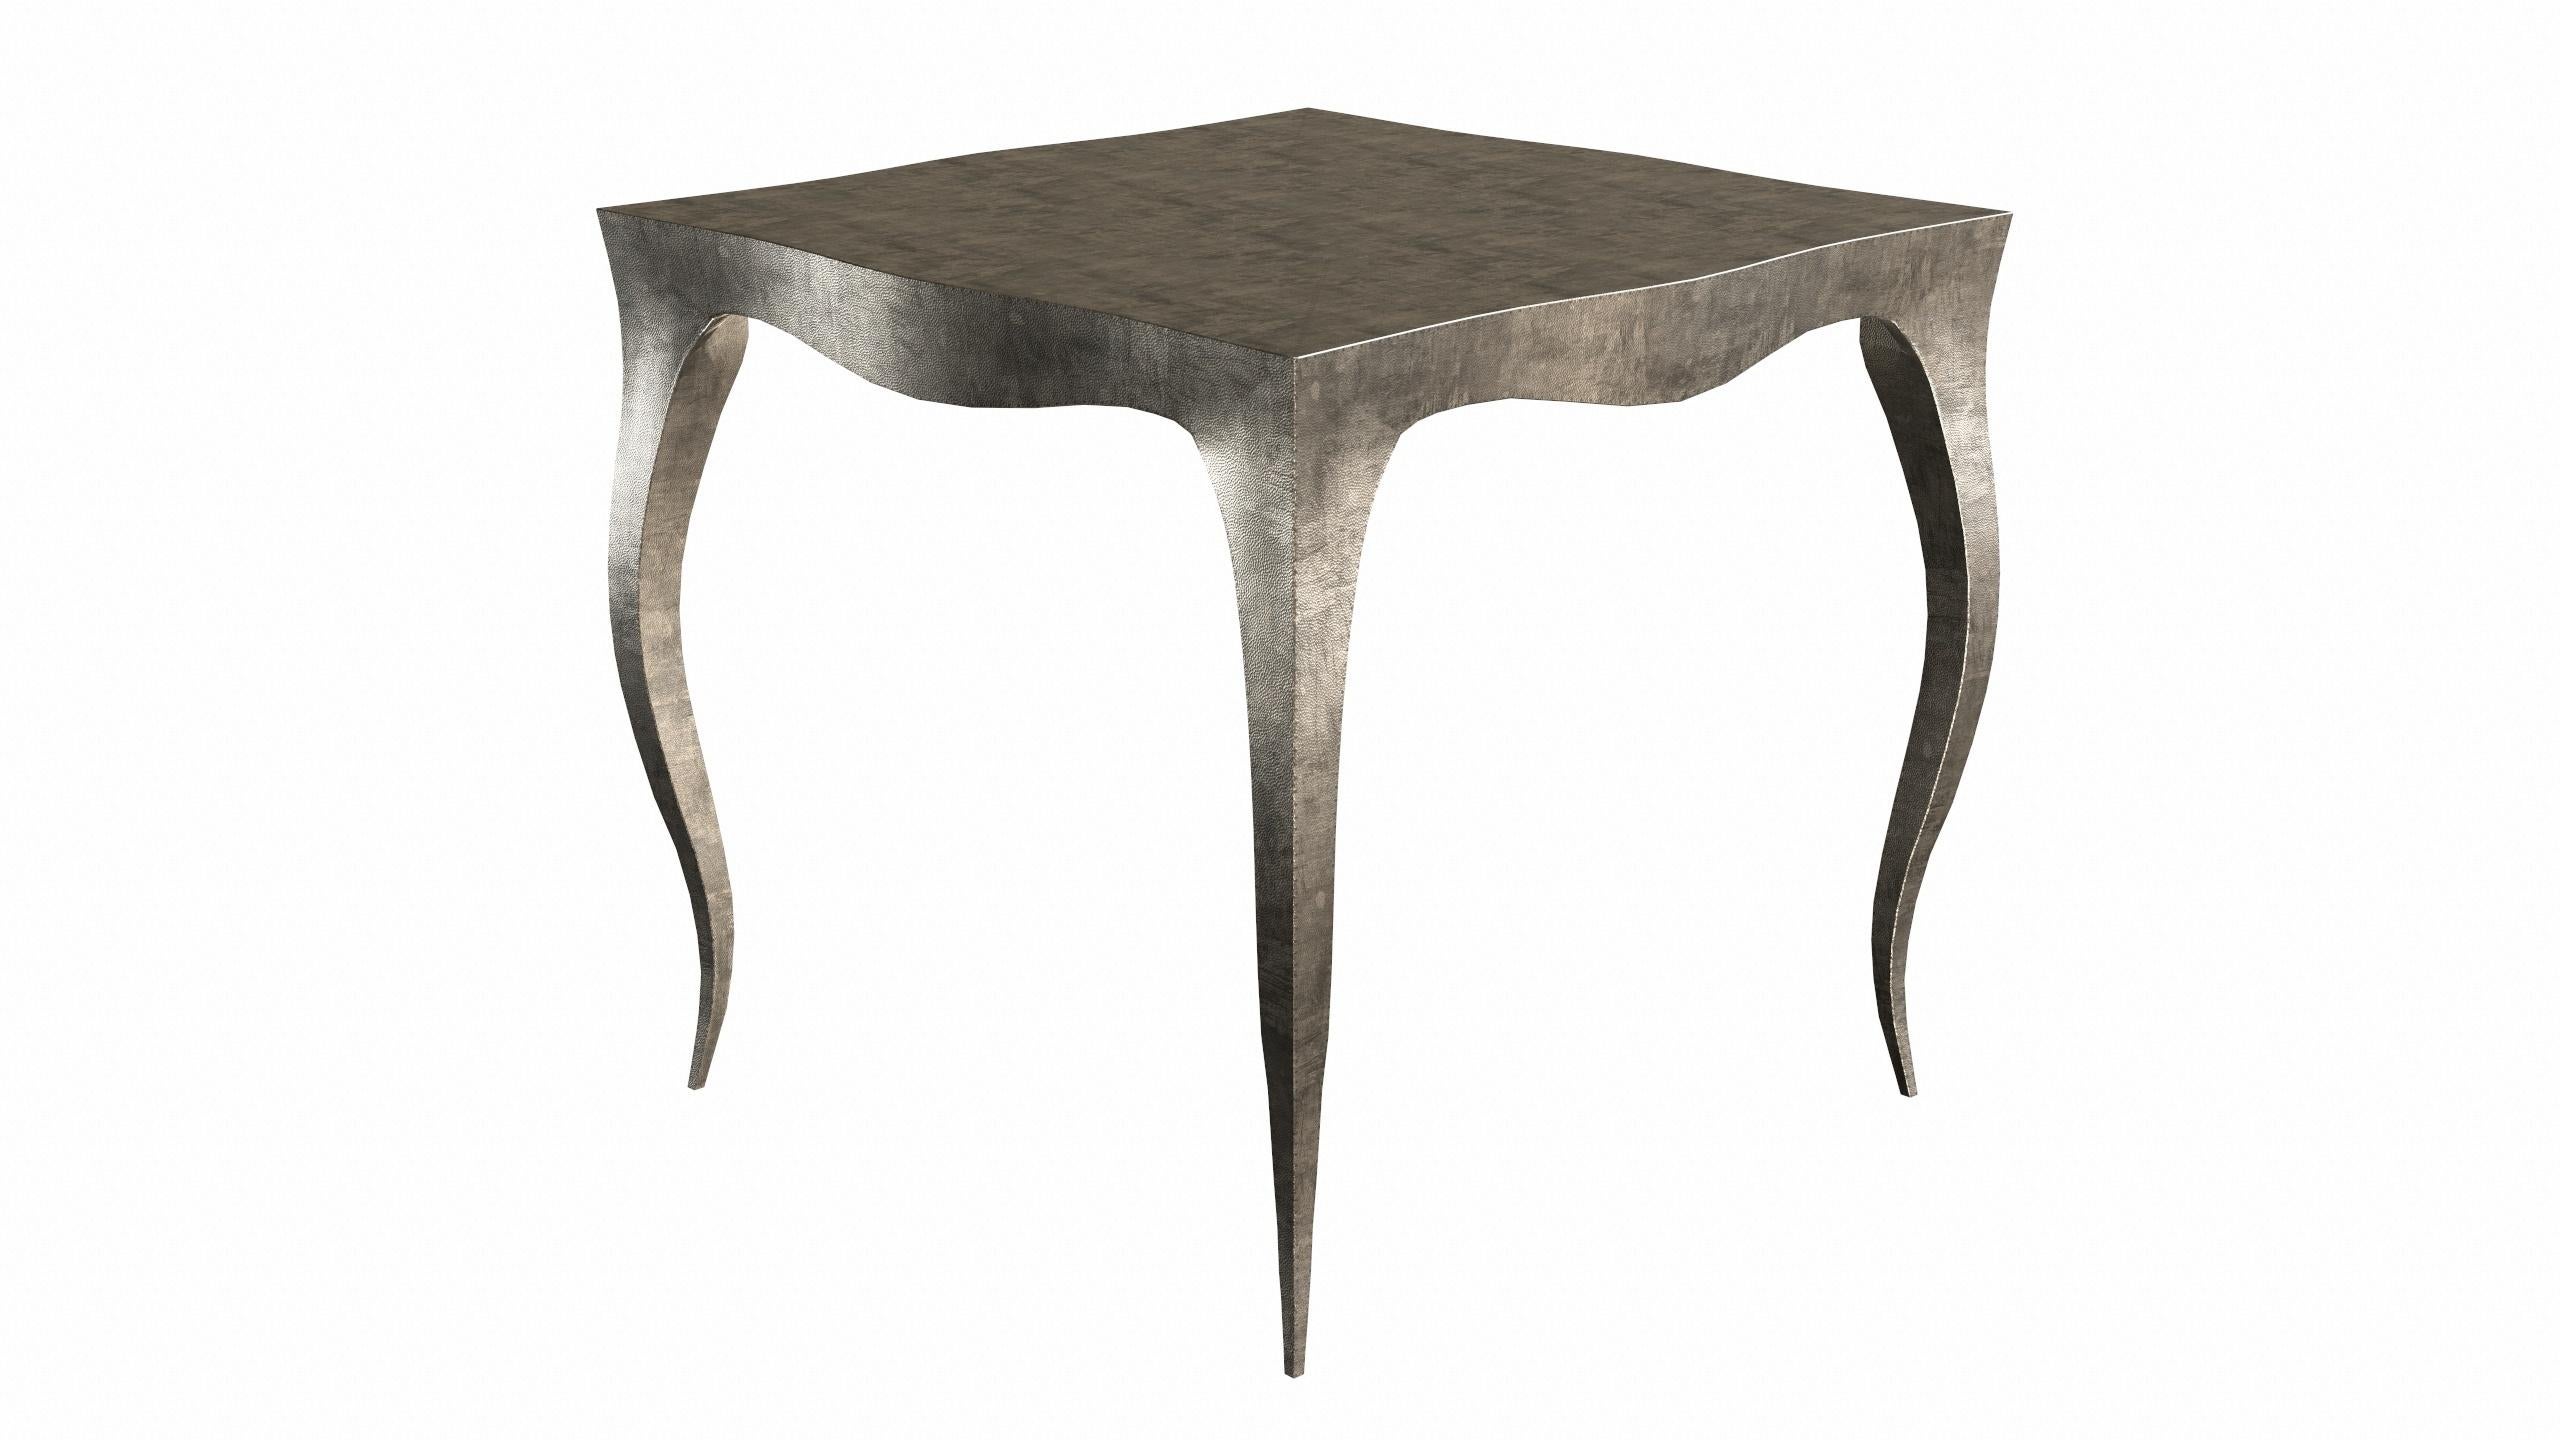 Metal Louise Art Deco Conference Tables Mid. Hammered Antique Bronze by Paul Mathieu For Sale